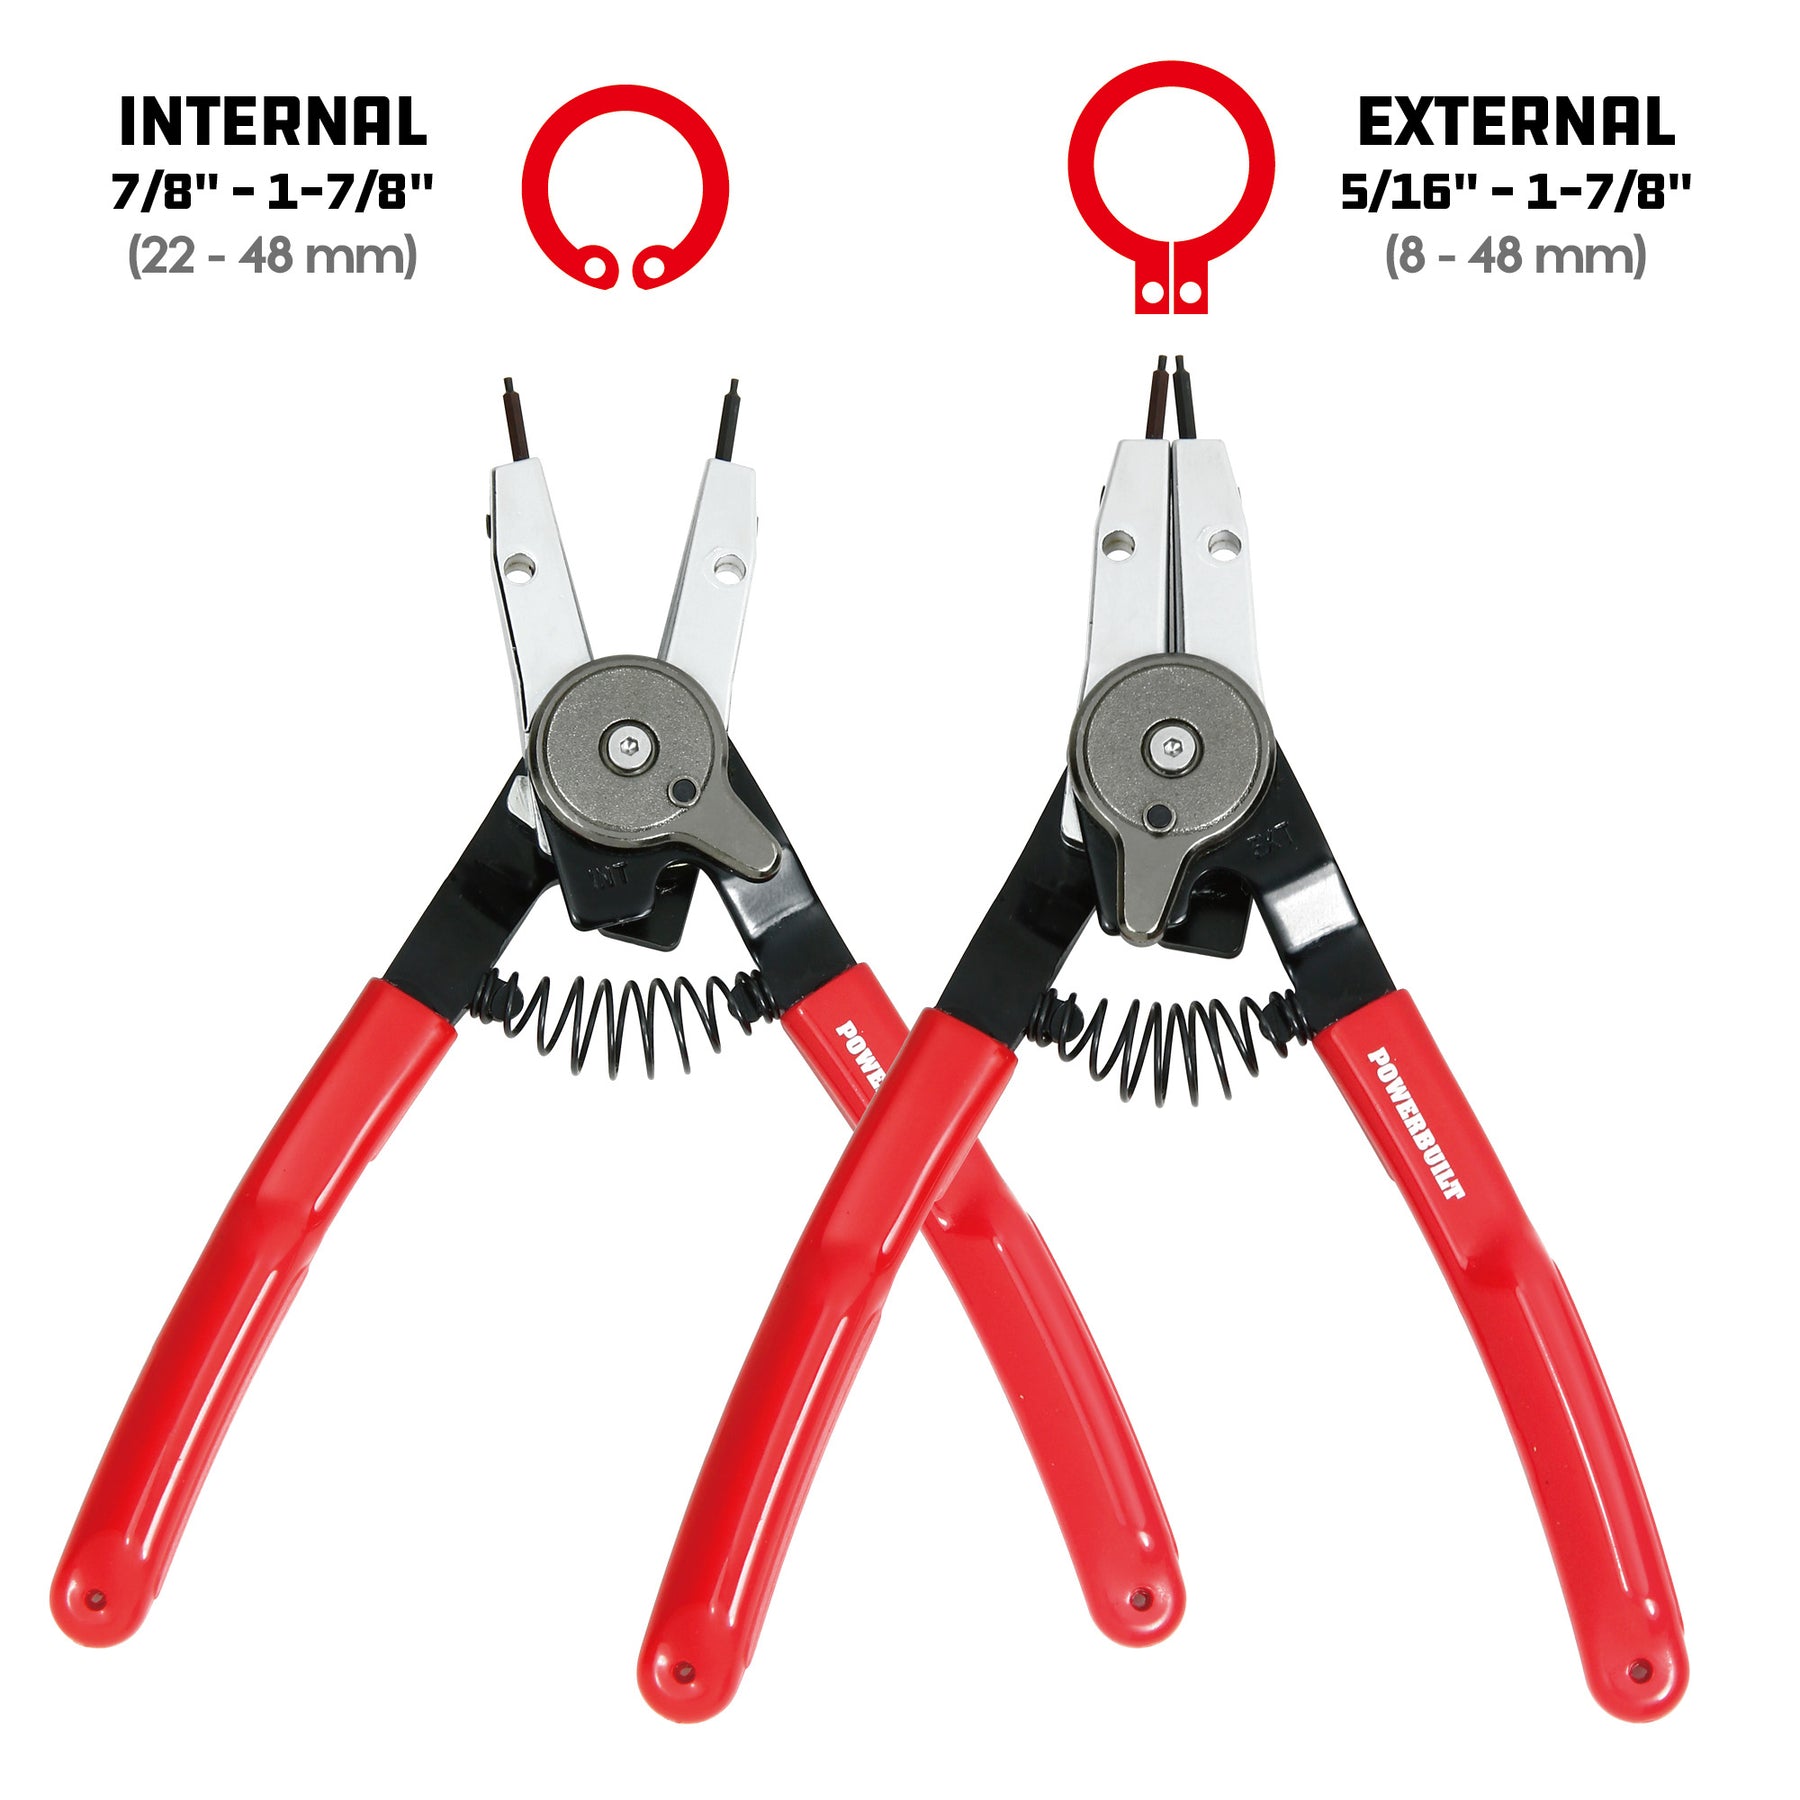 STRAIGHT EXTERNAL SNAP-RING PLIERS - SP Tools